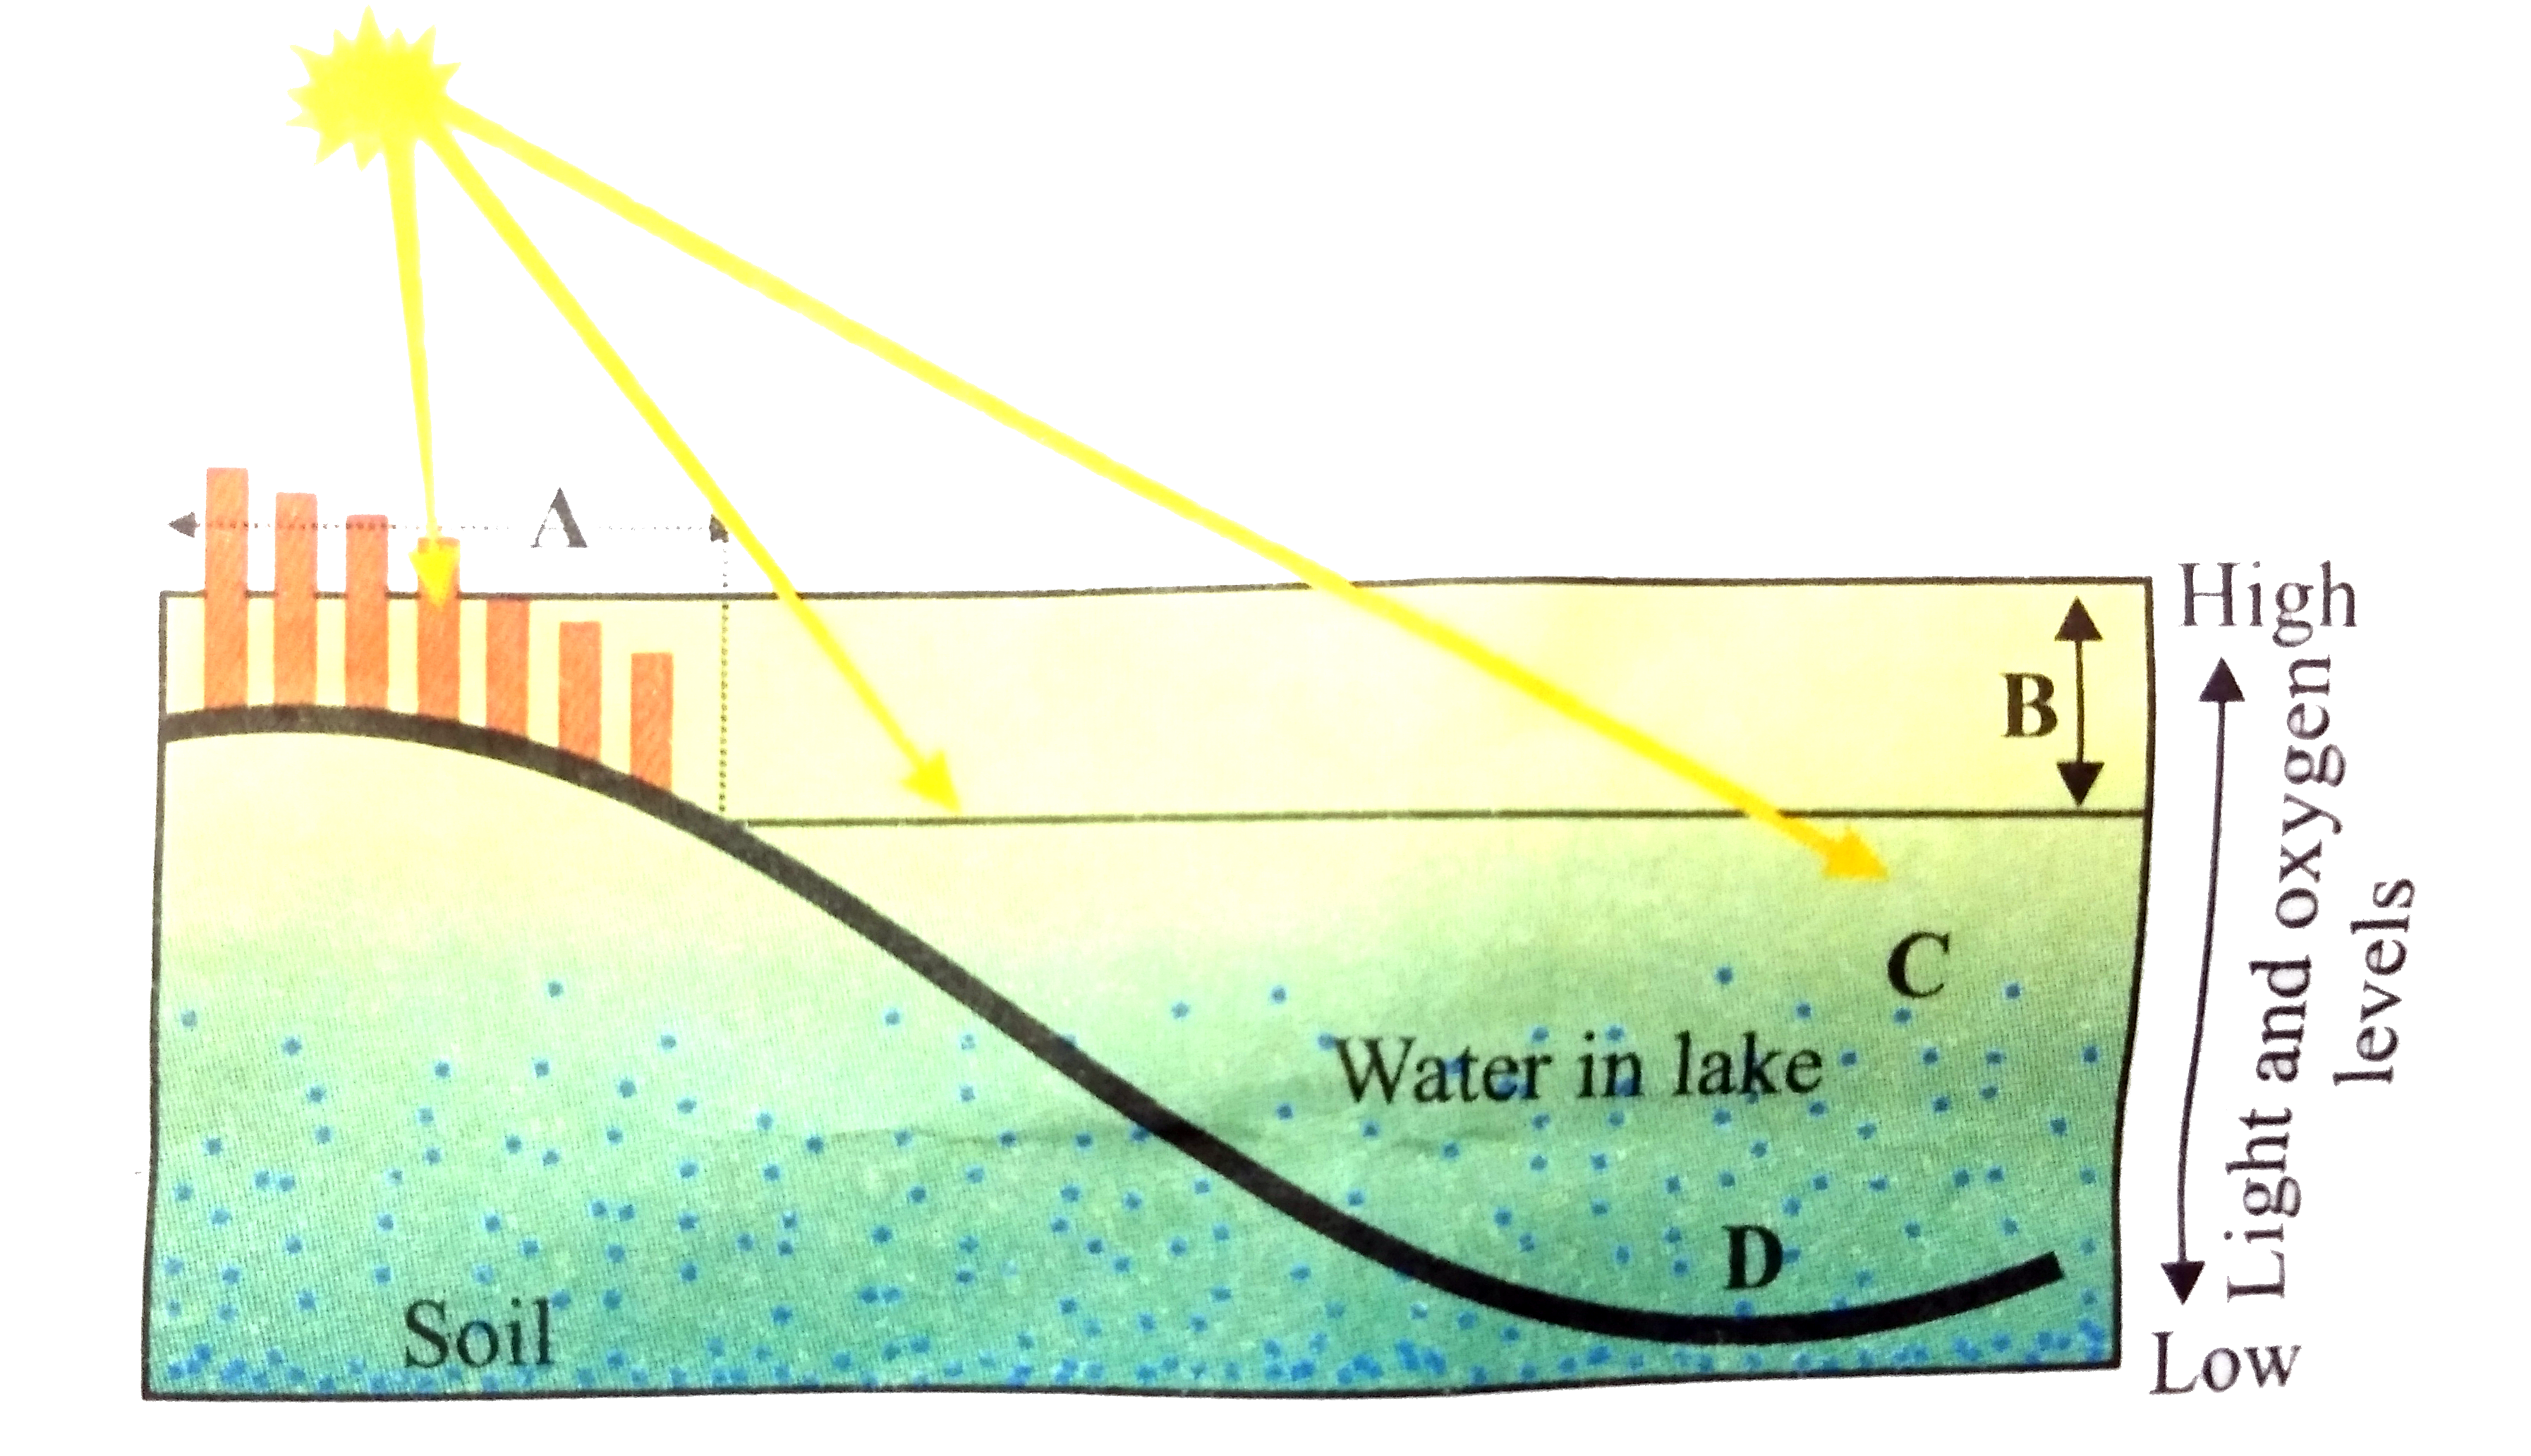 Refer to the given figure showing different zones in a deep lake. Ini which zone of the lake, producers occur throughout from surface to bottom?